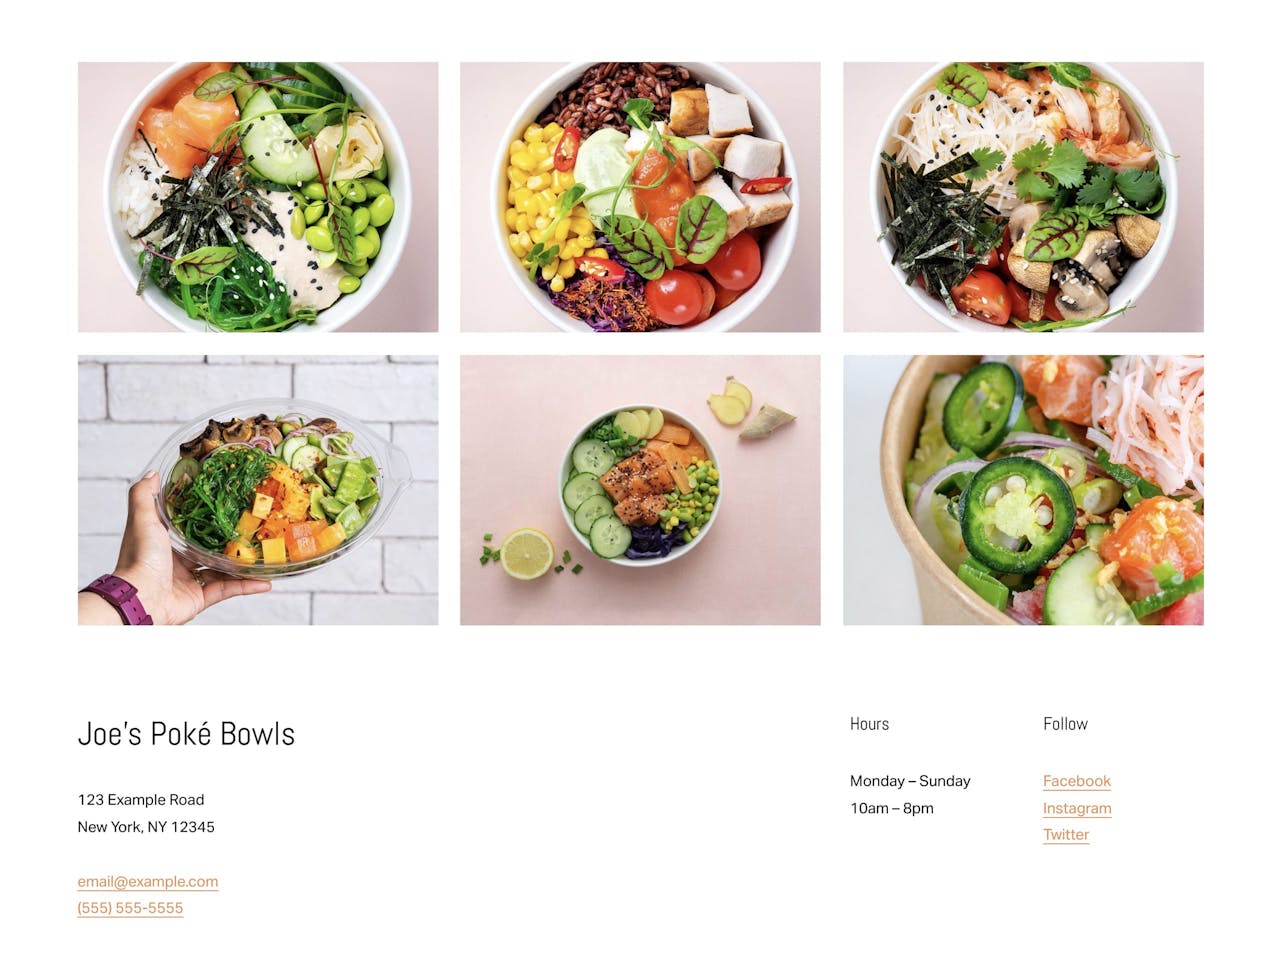 Squarespace restaurant website gallery and footer Screenshot